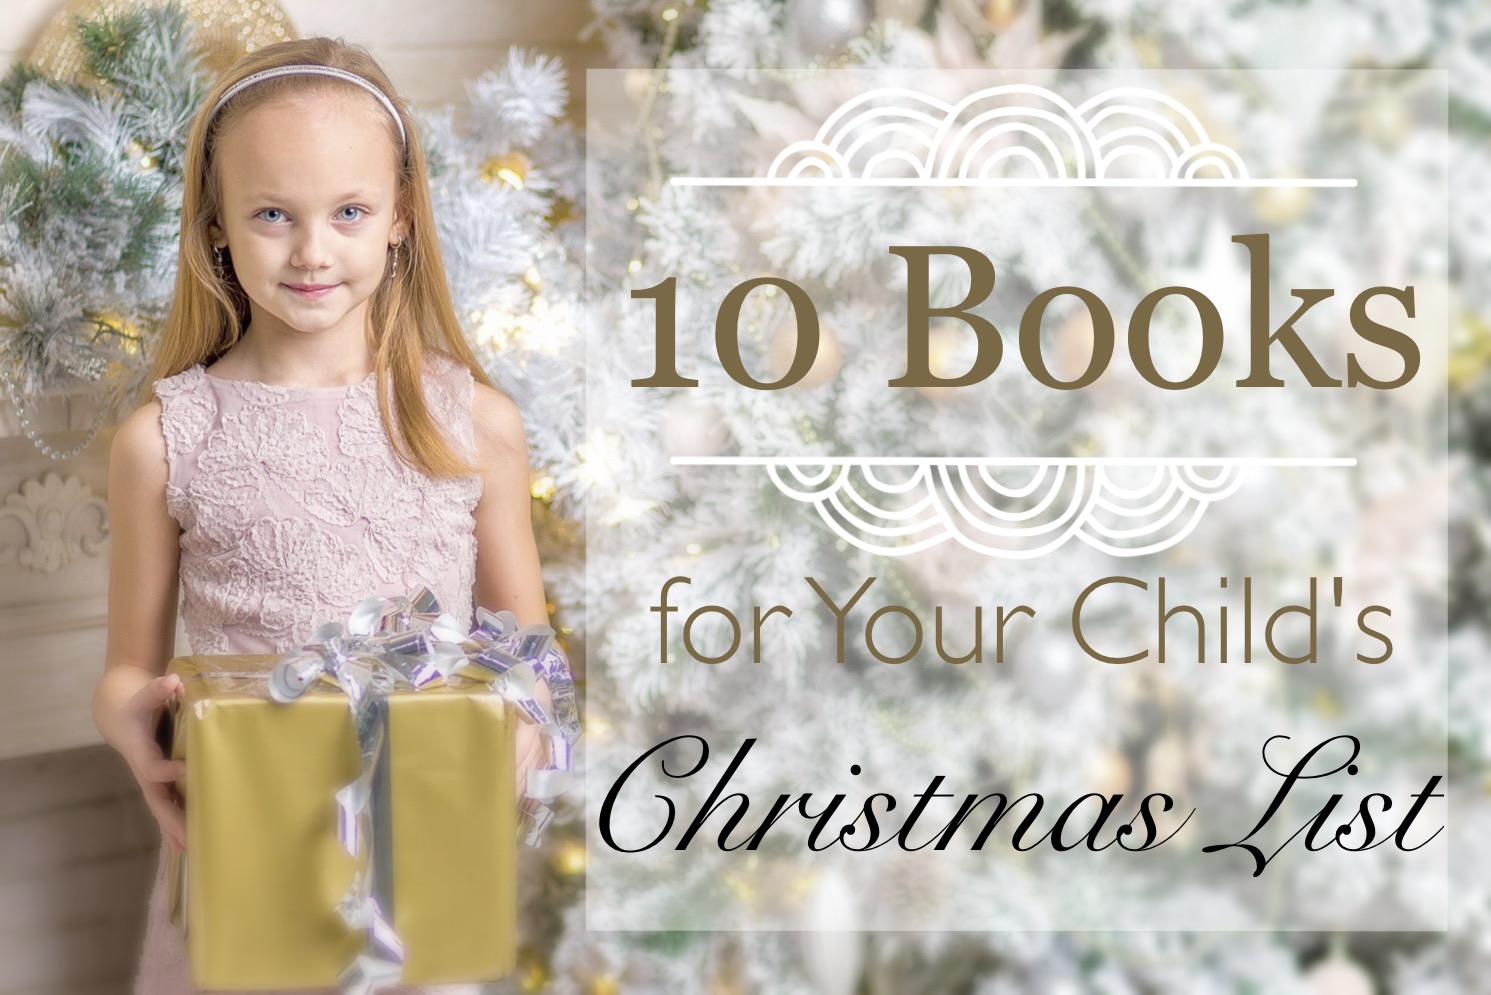 10 Books for your Child's Christmas List